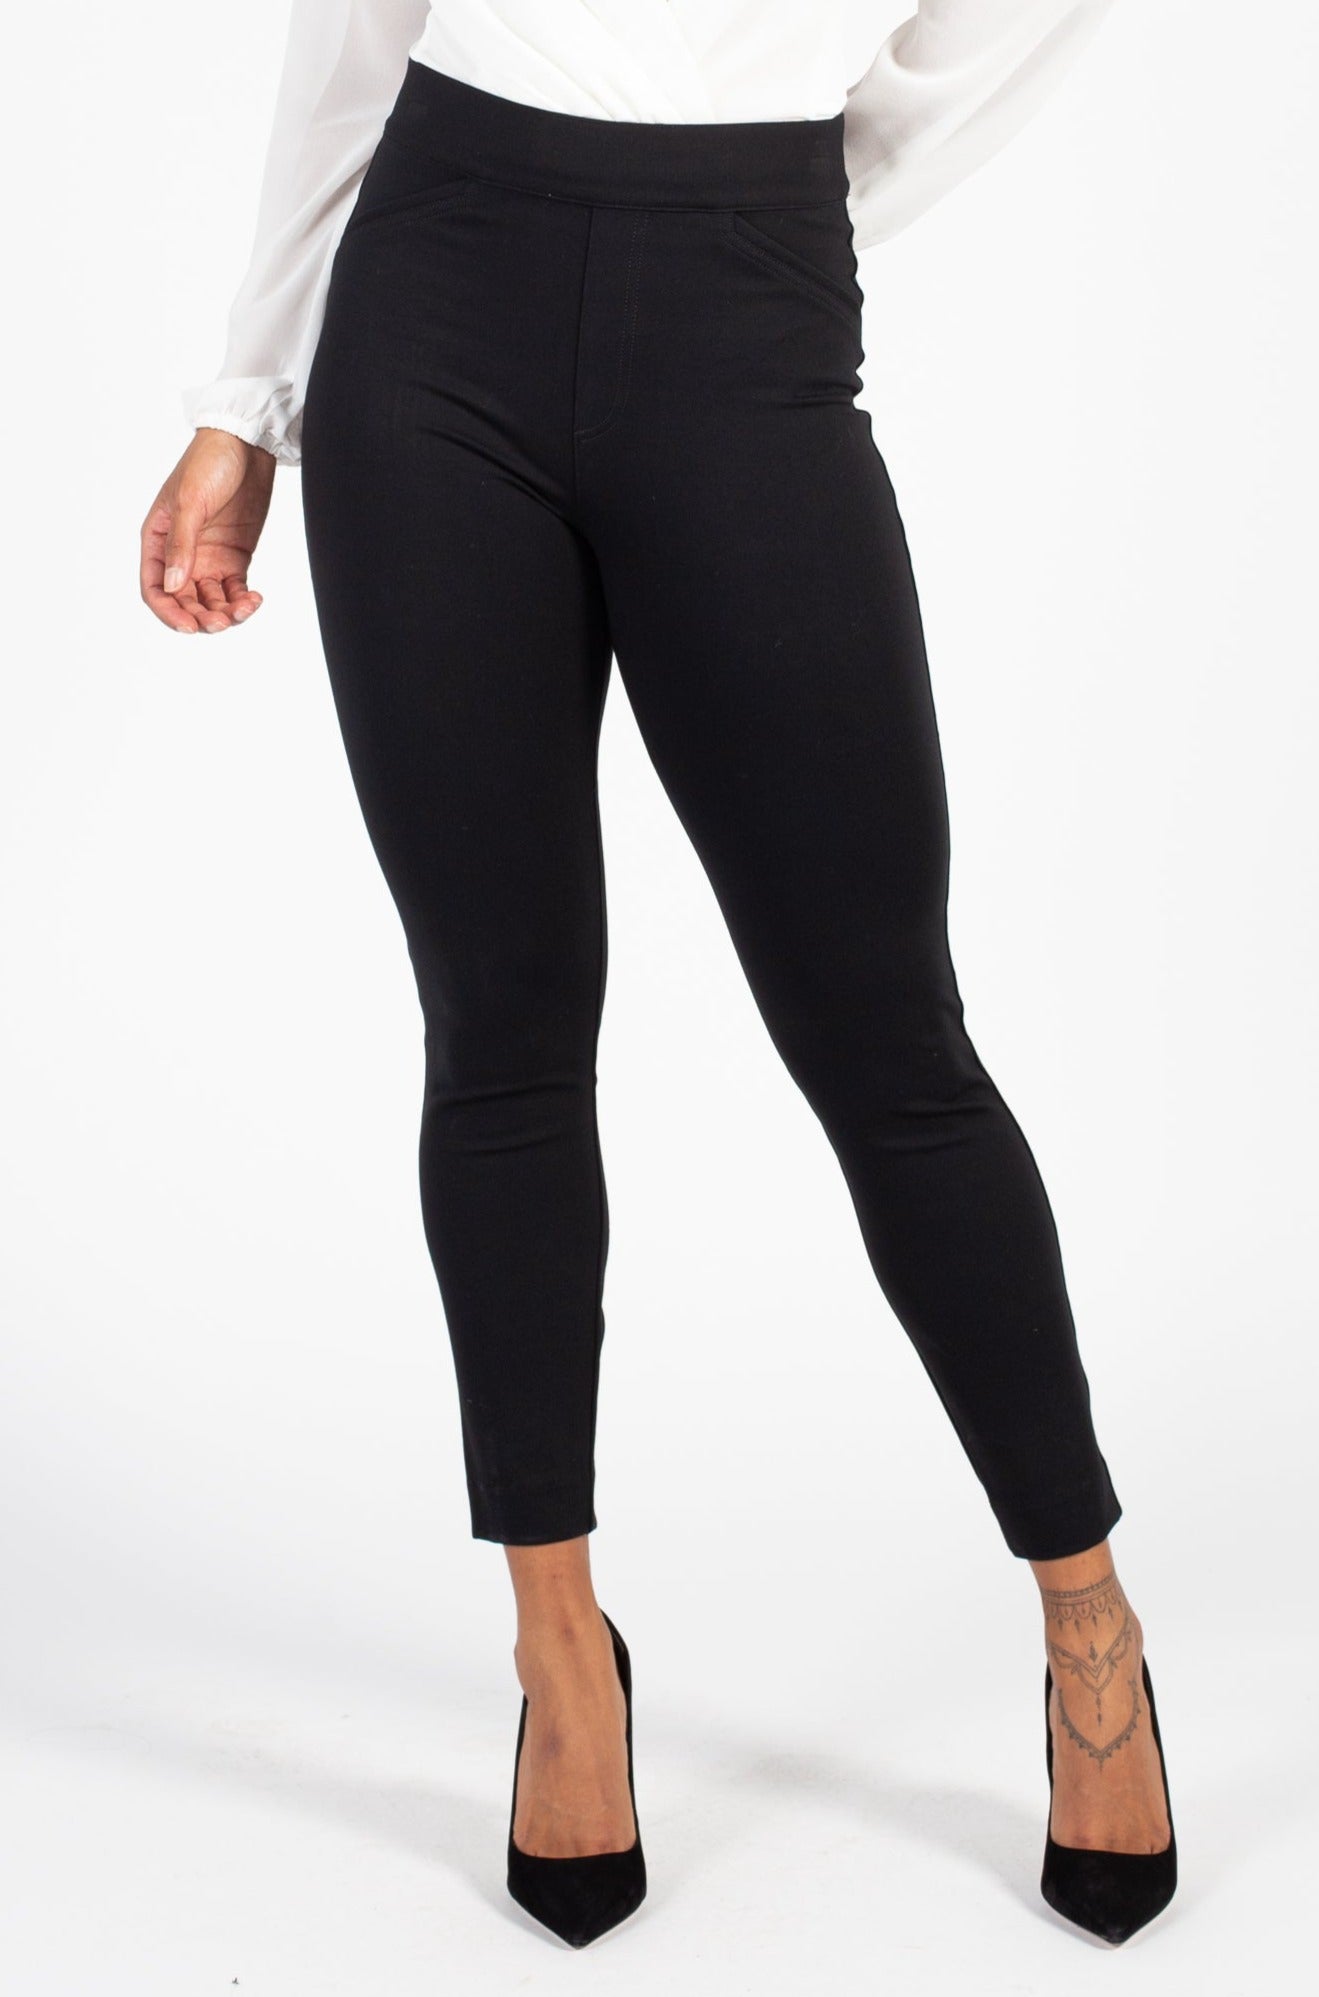 Spanx Faux Patent Leather Legging